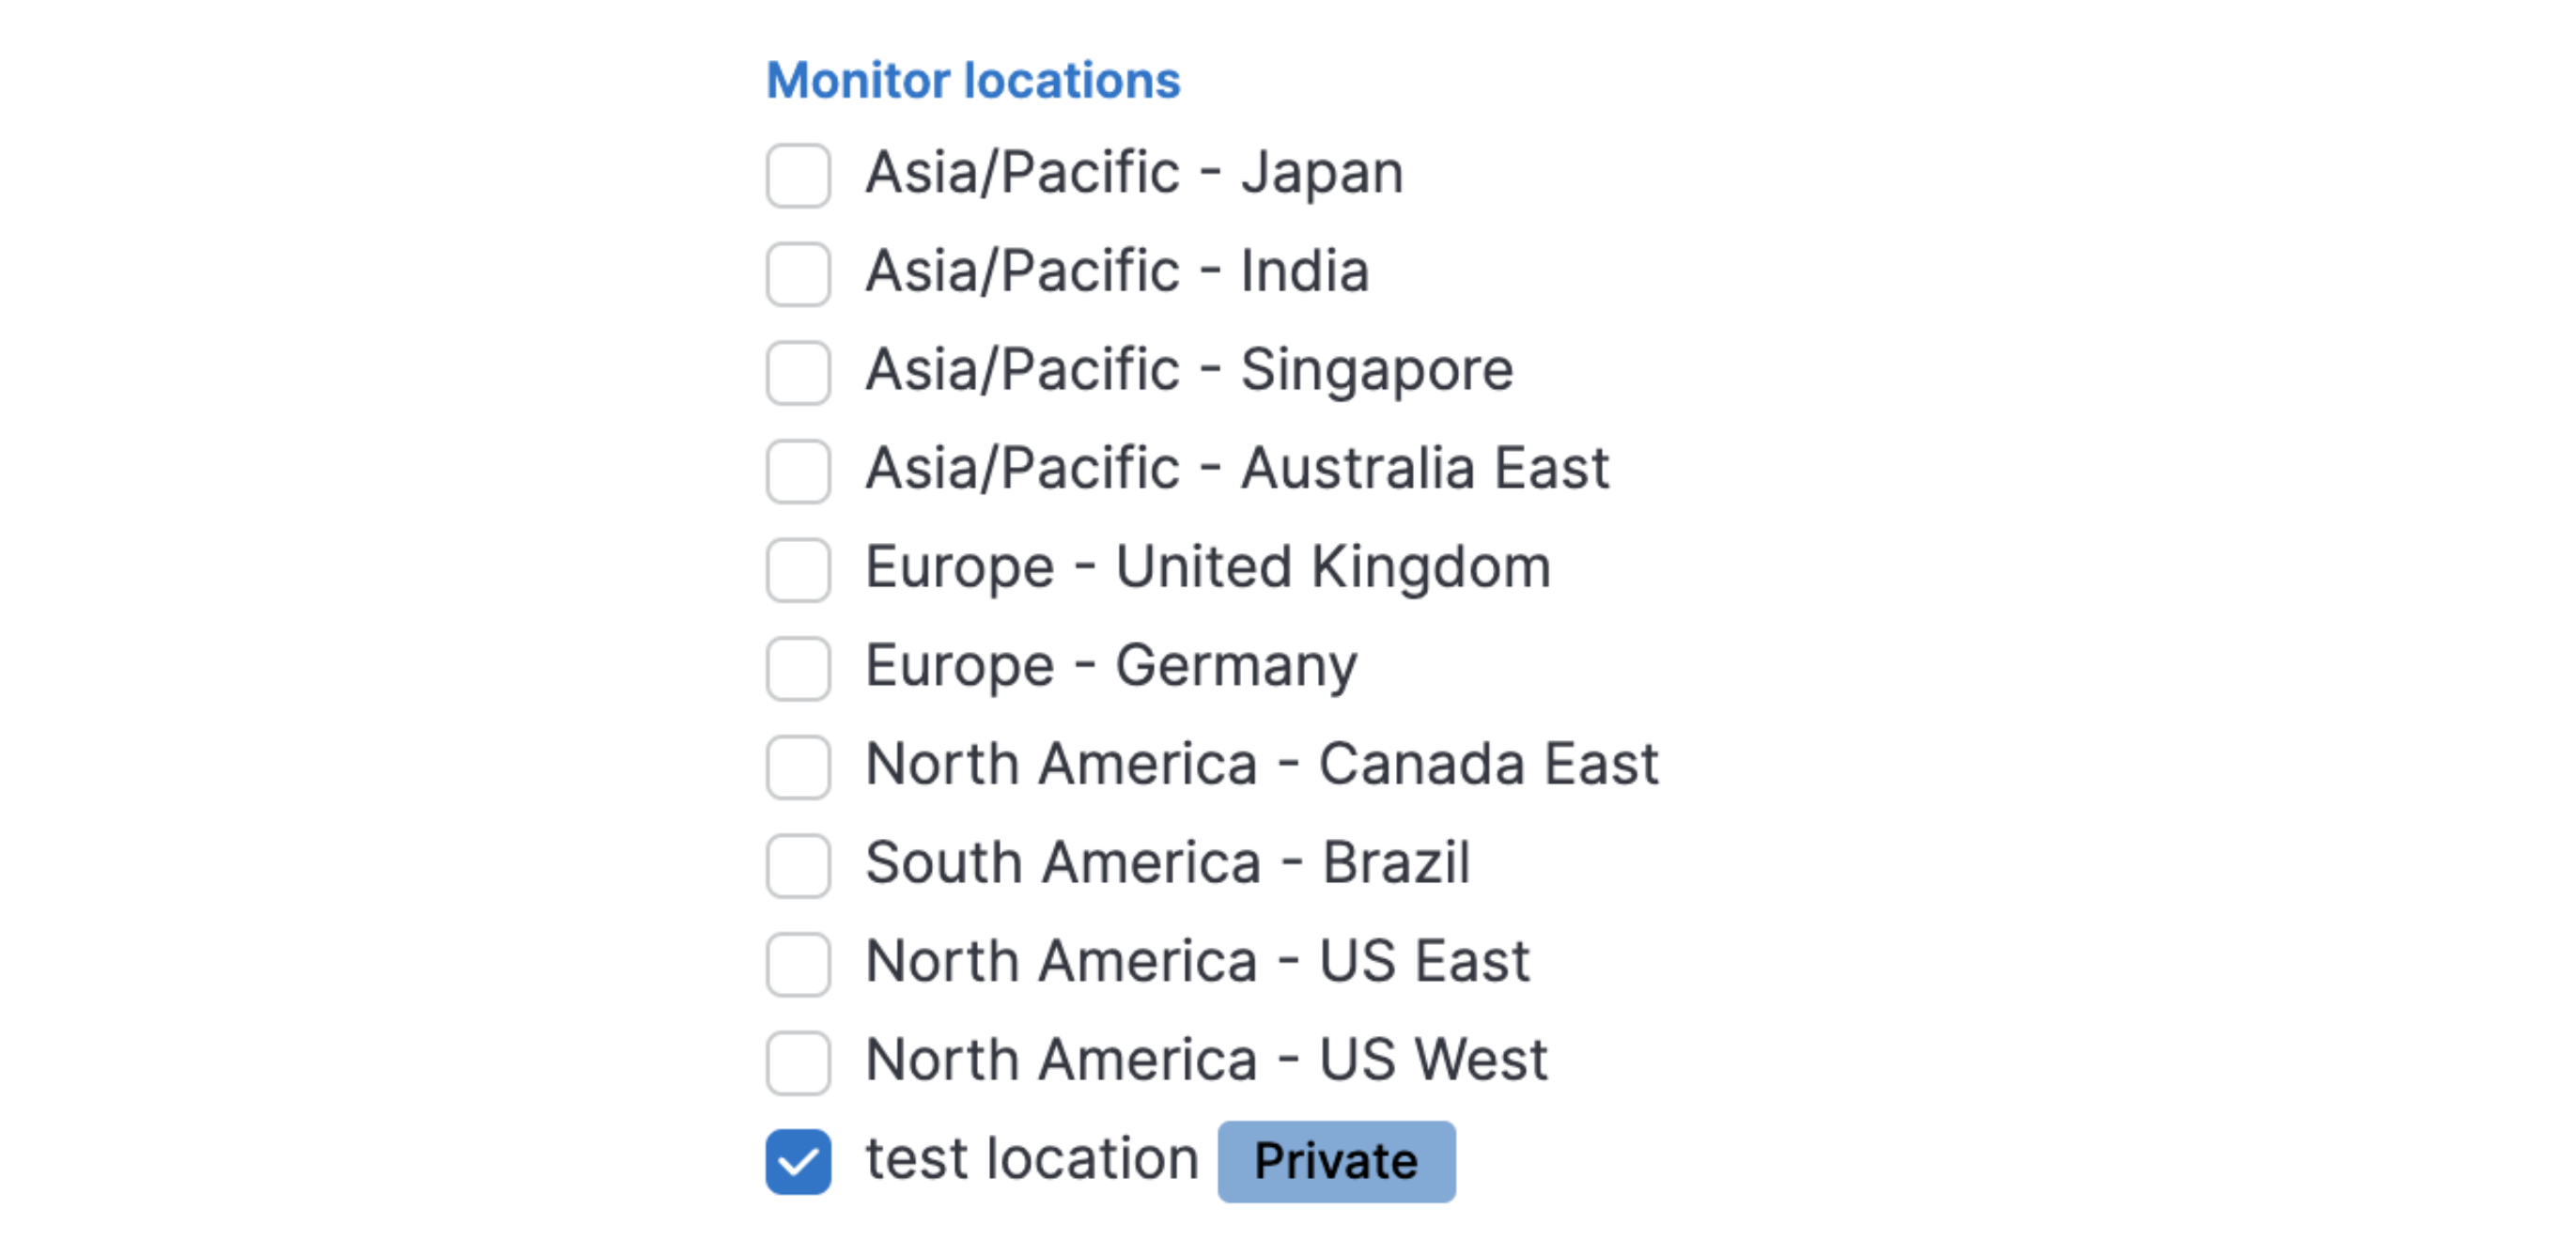 Screenshot of Monitor locations options including a private location